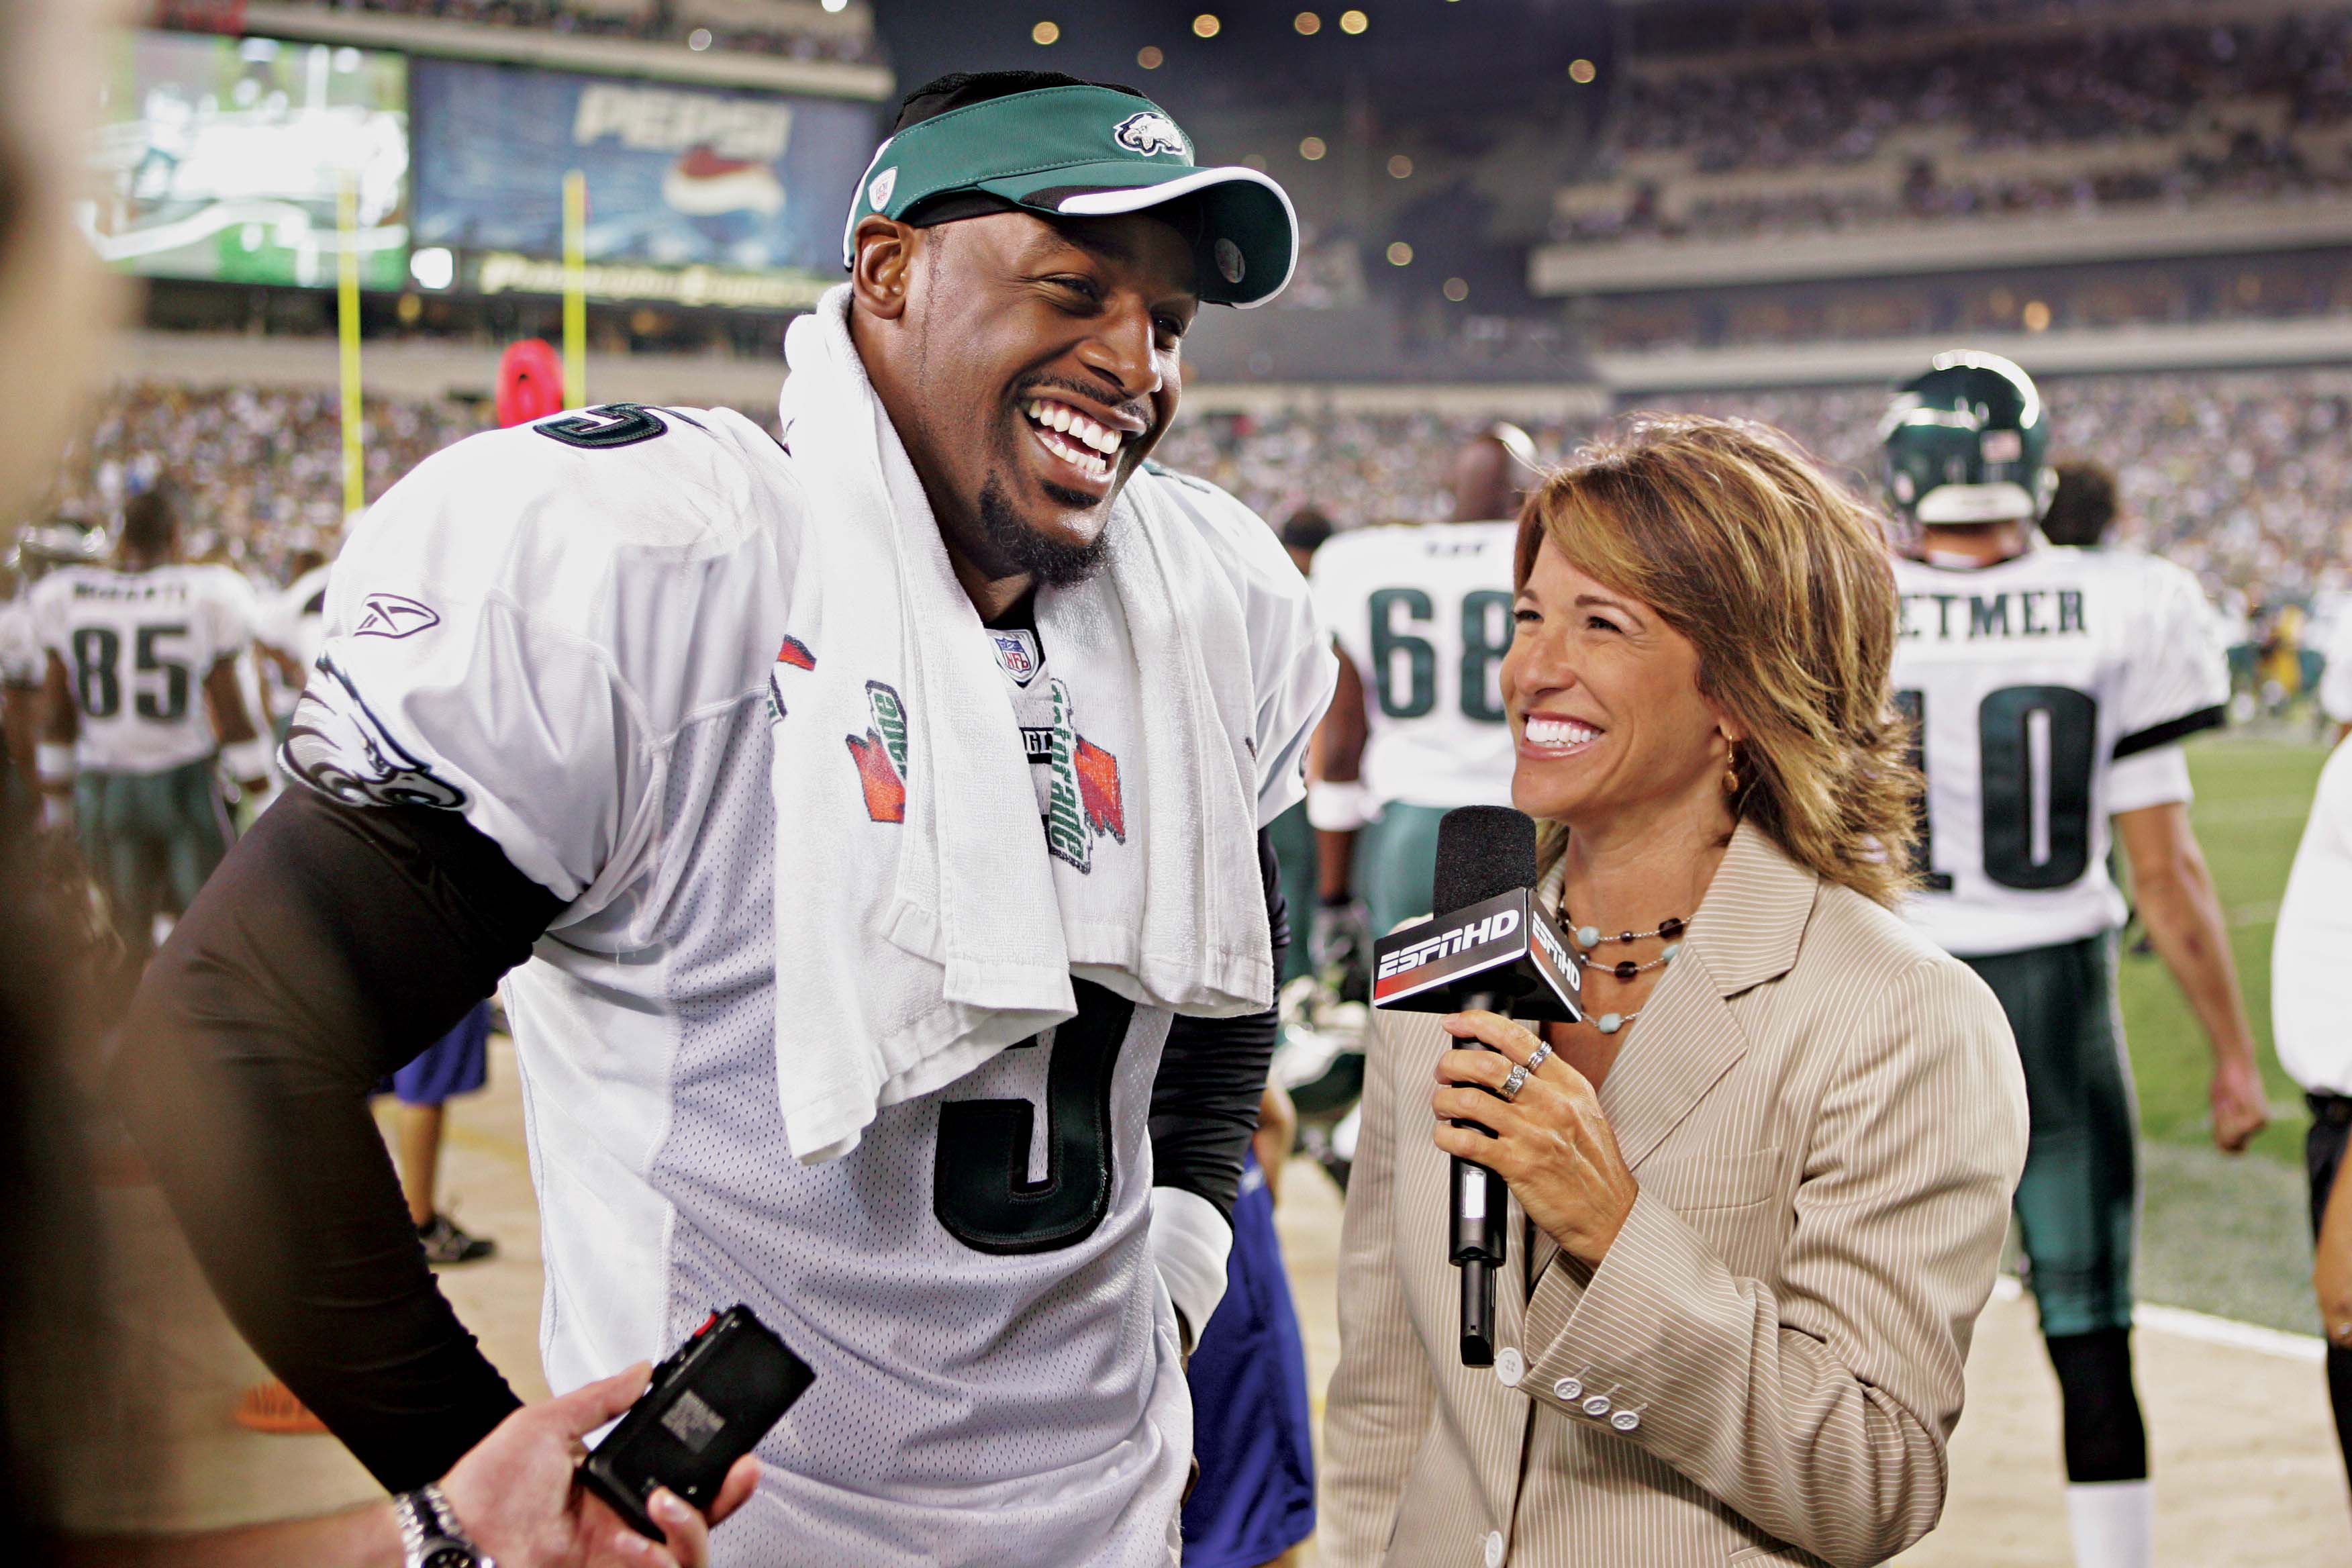 Suzy Kolber and the Super Bowl - American Profile